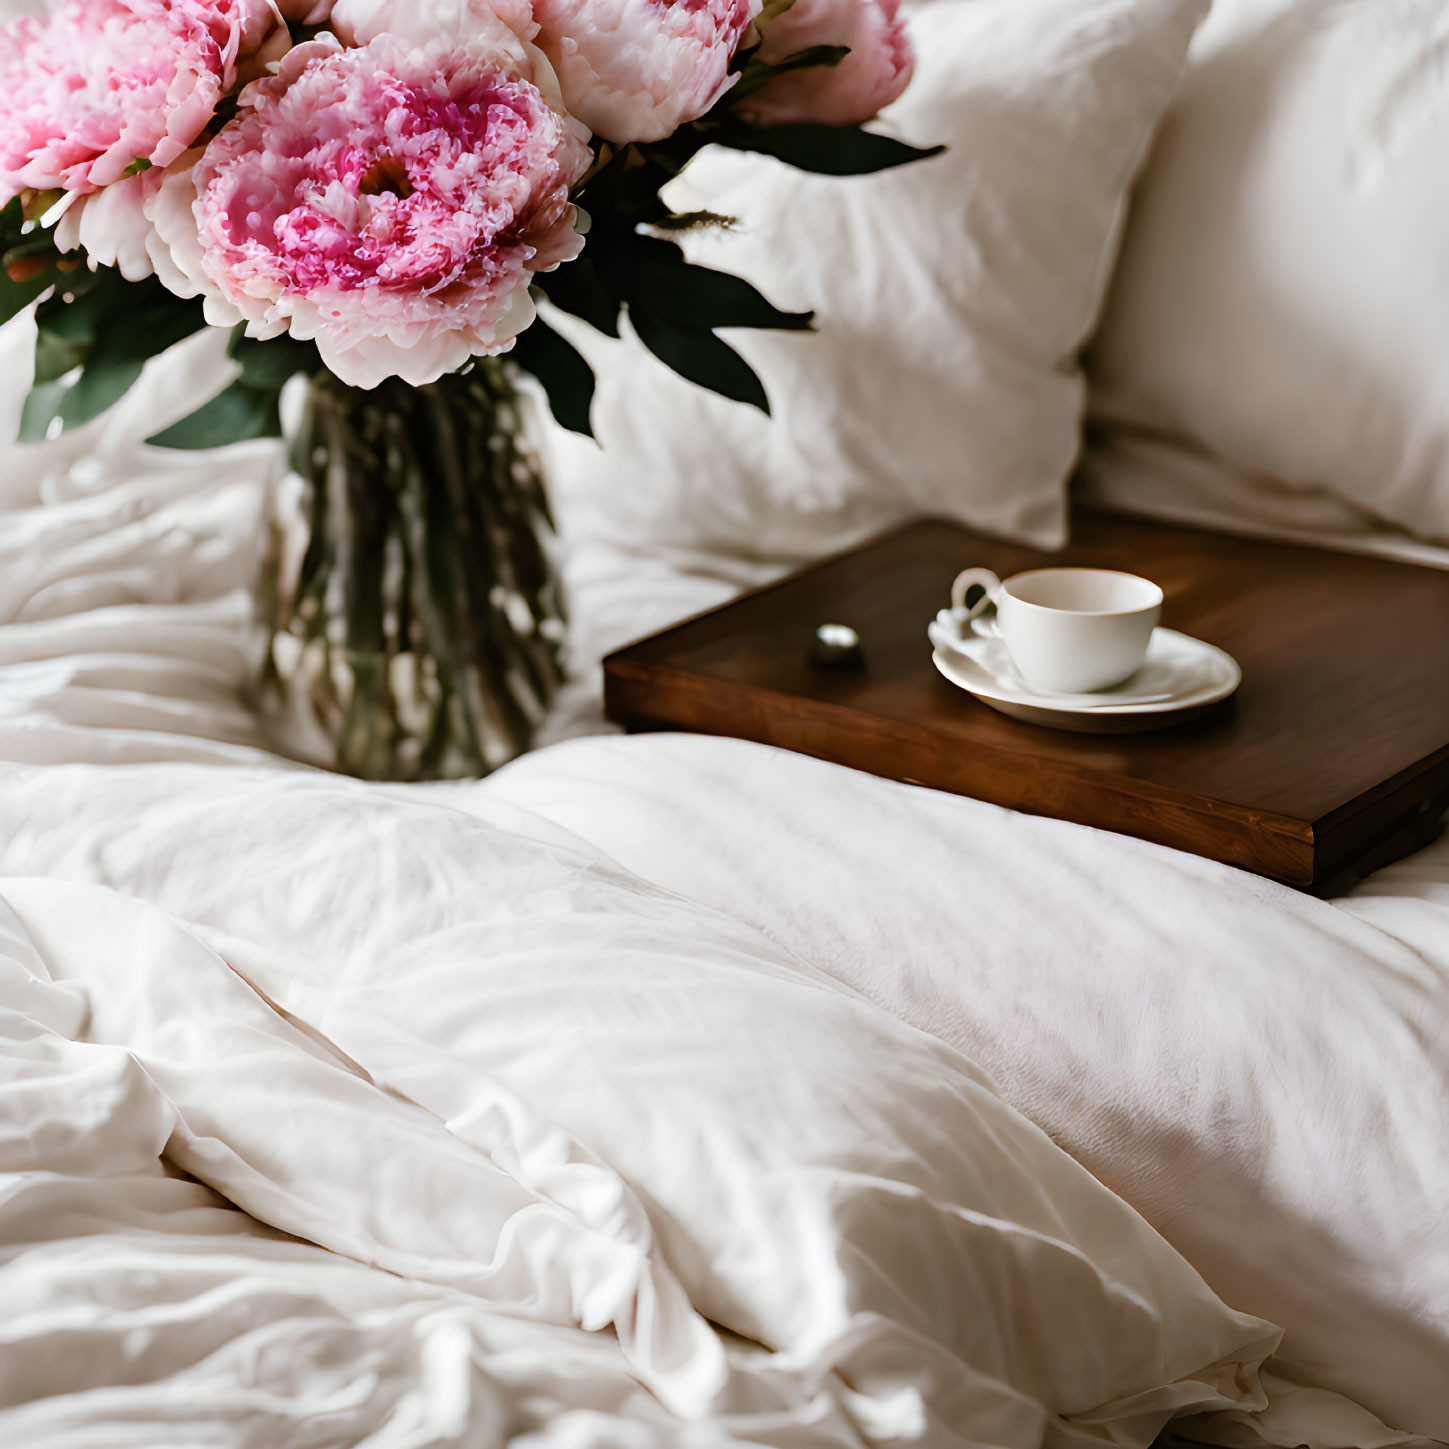 Cozy Bedroom Scene with Wooden Tray, Coffee Cup, and Pink Peonies